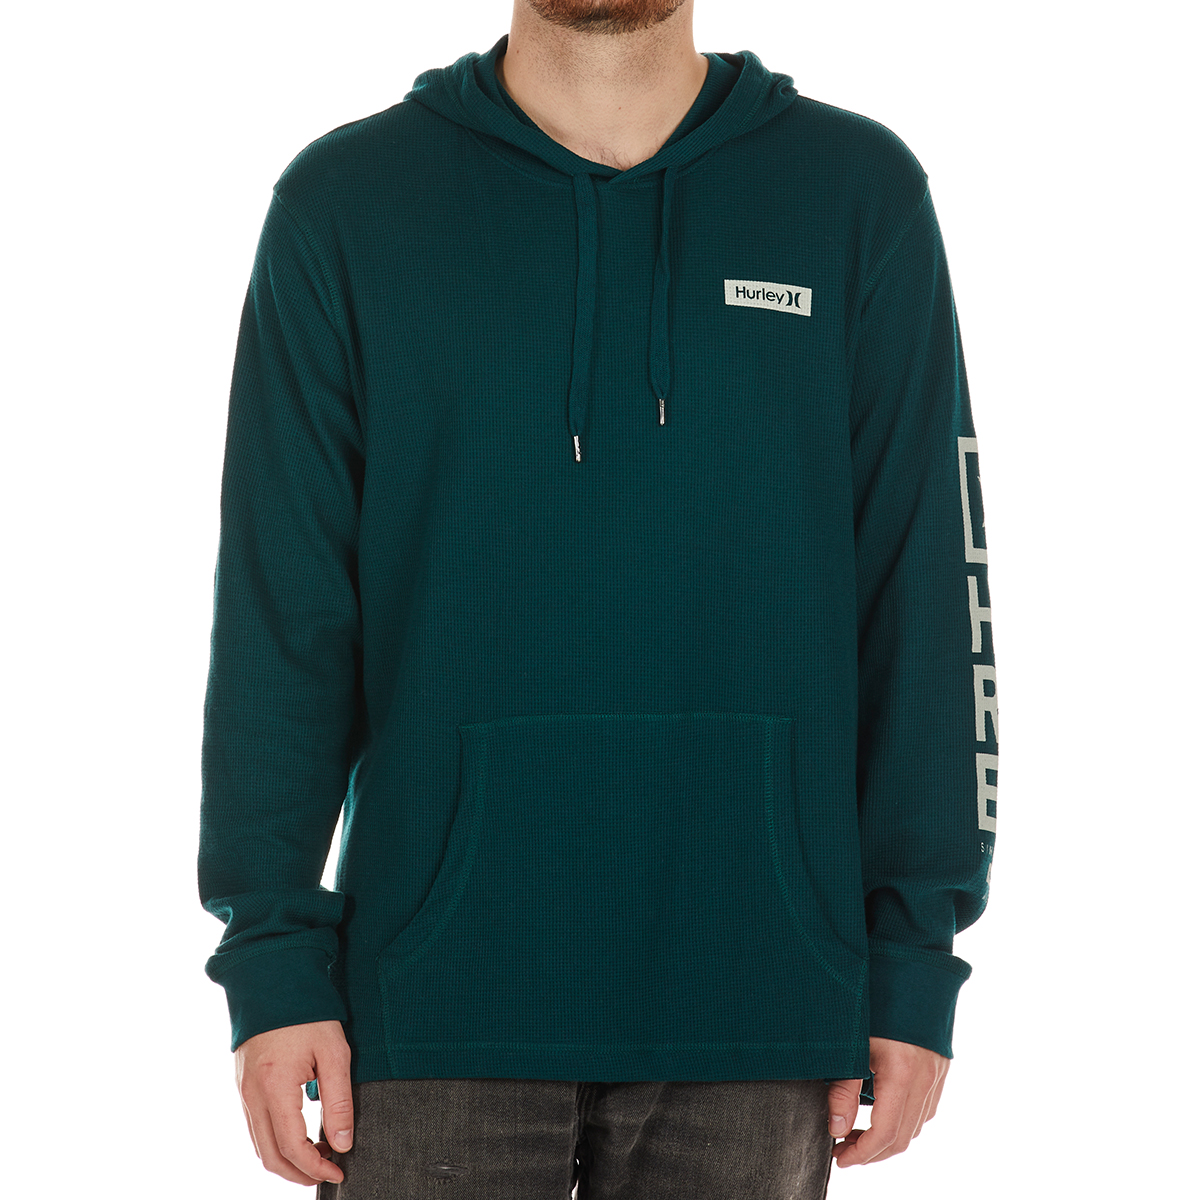 Hurley Young Men's Thermal Hooded Tee, Green